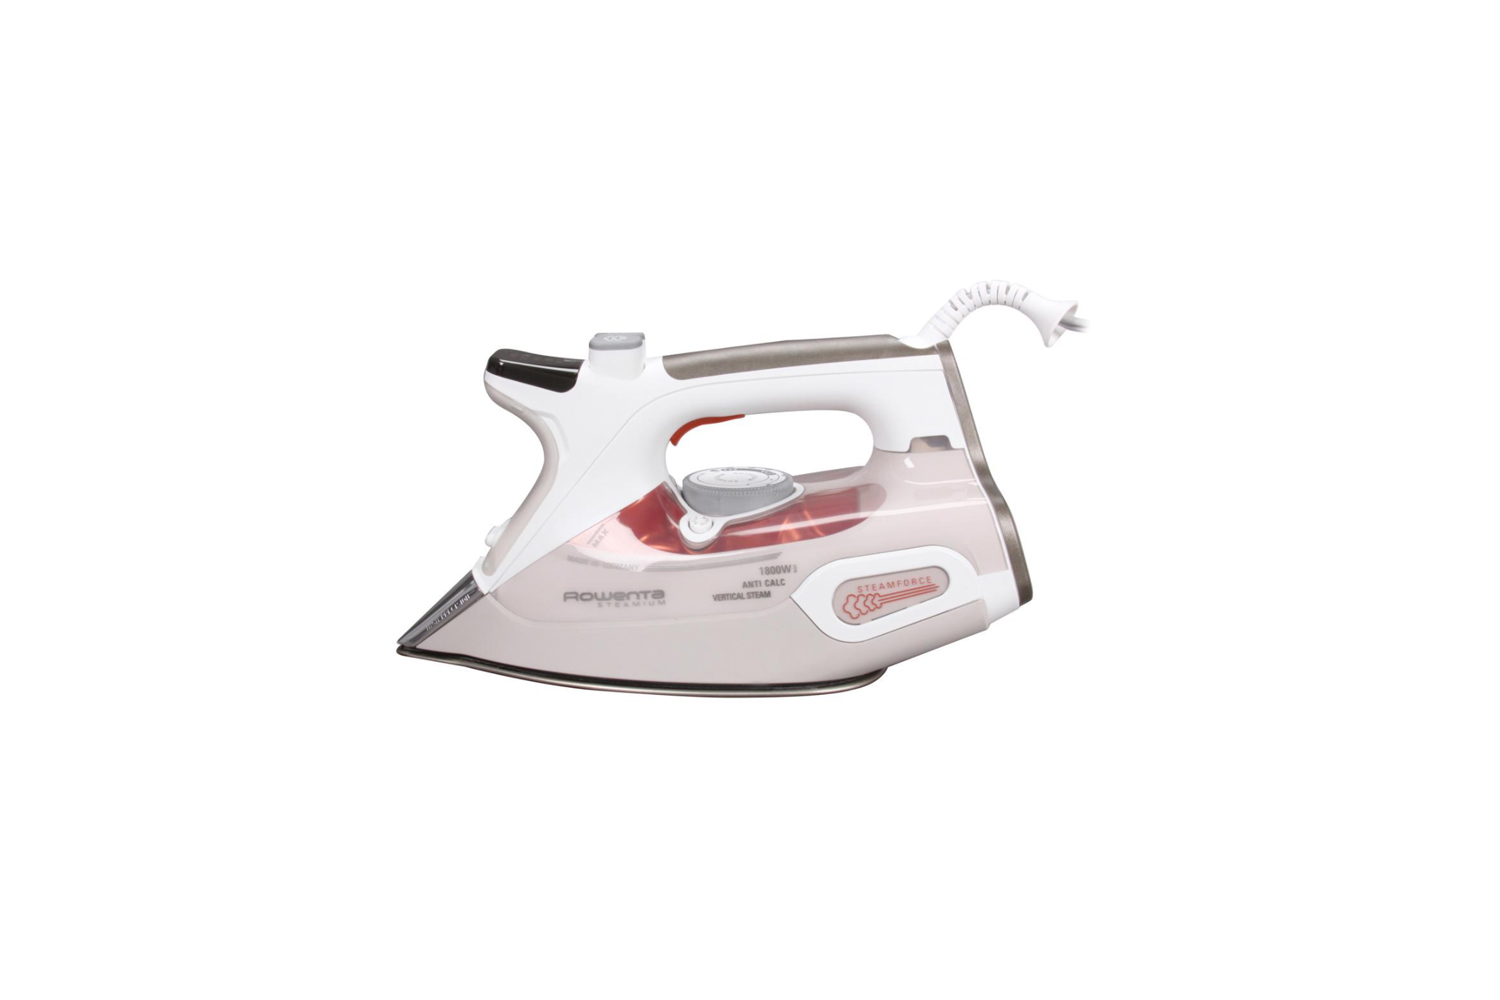 another style from rowenta, the steamium steam iron in brown is available throu 13